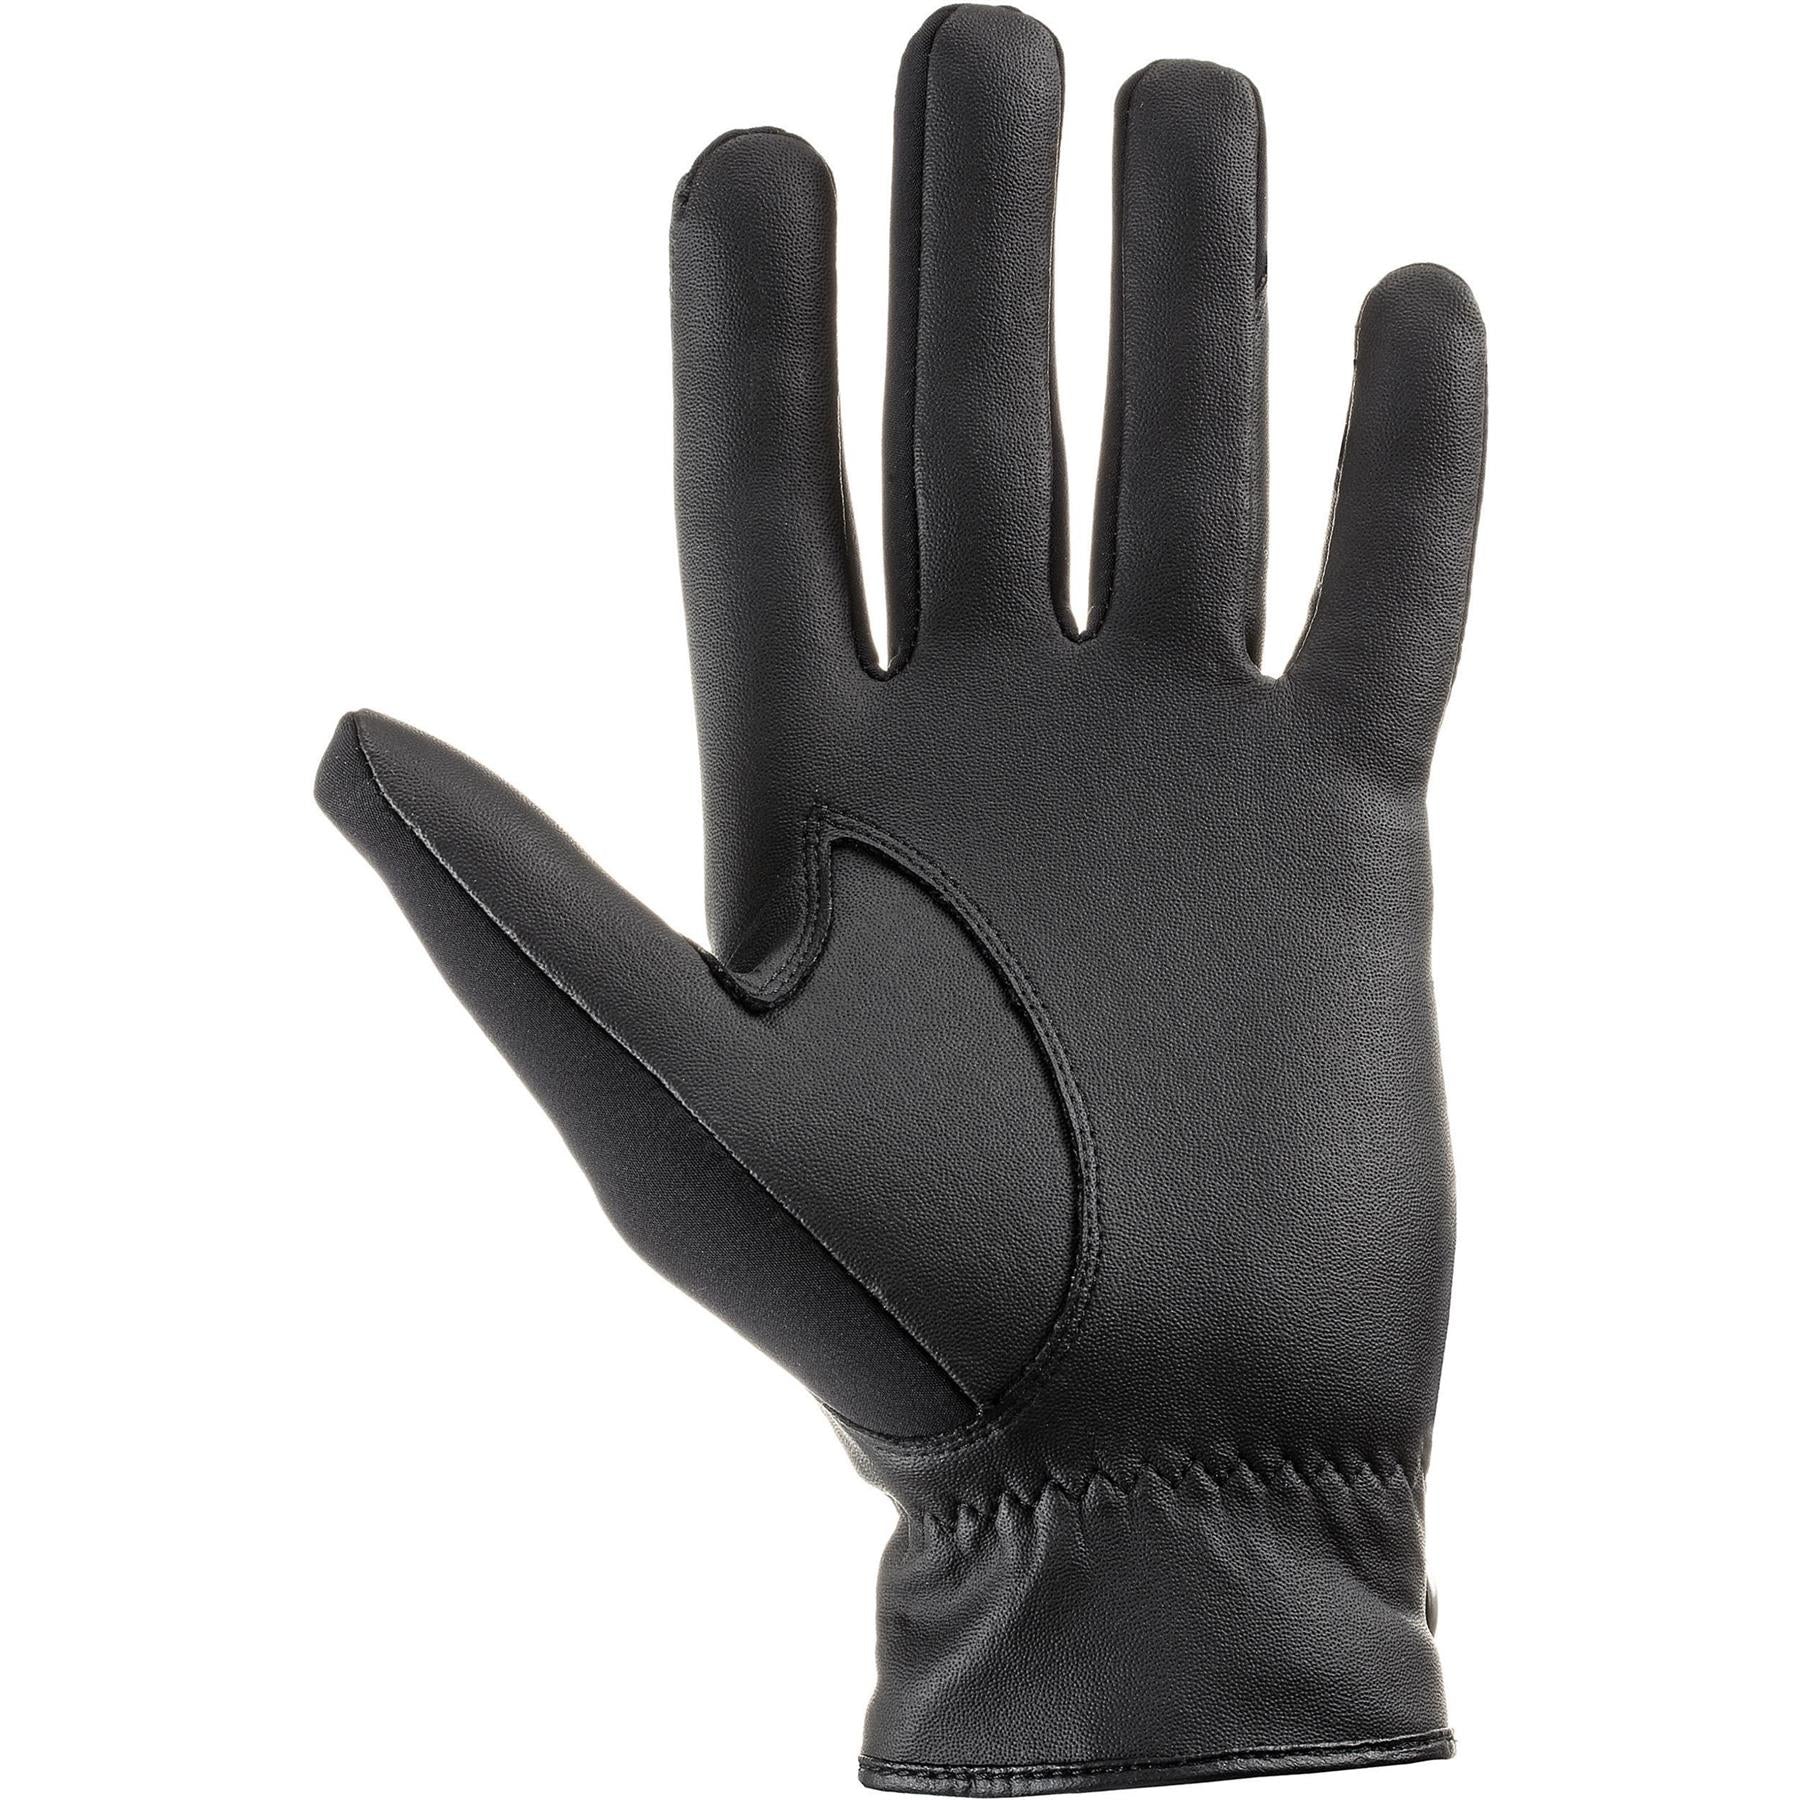 Uvex Crx700 Horse Riding Gloves - Just Horse Riders